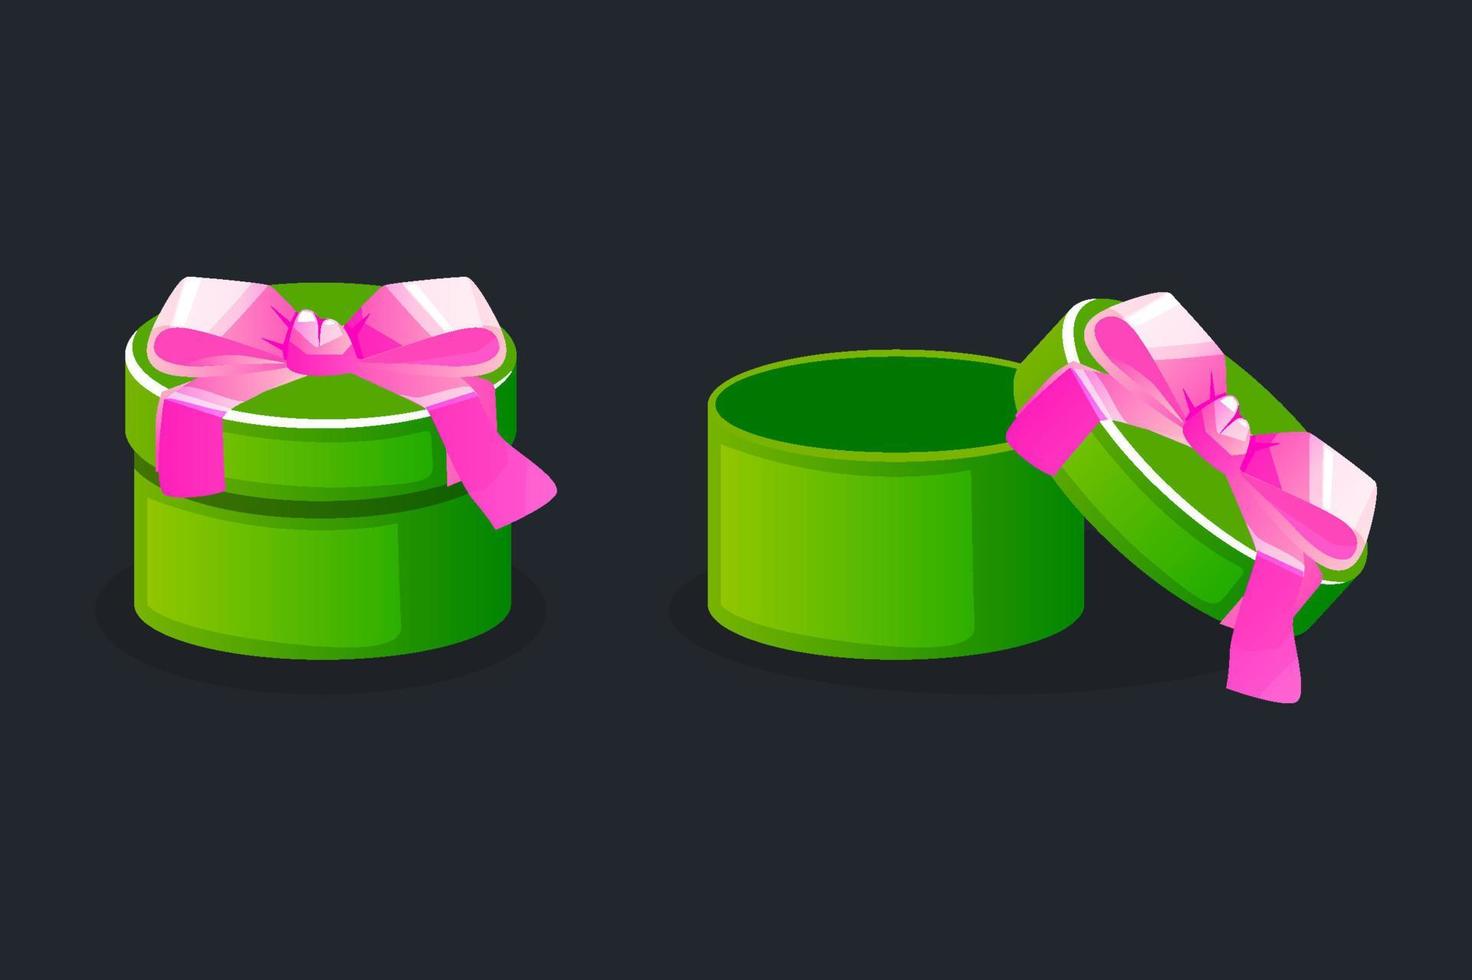 Round open and closed green gift boxes with bow for games. Vector illustration set empty box graphic element.